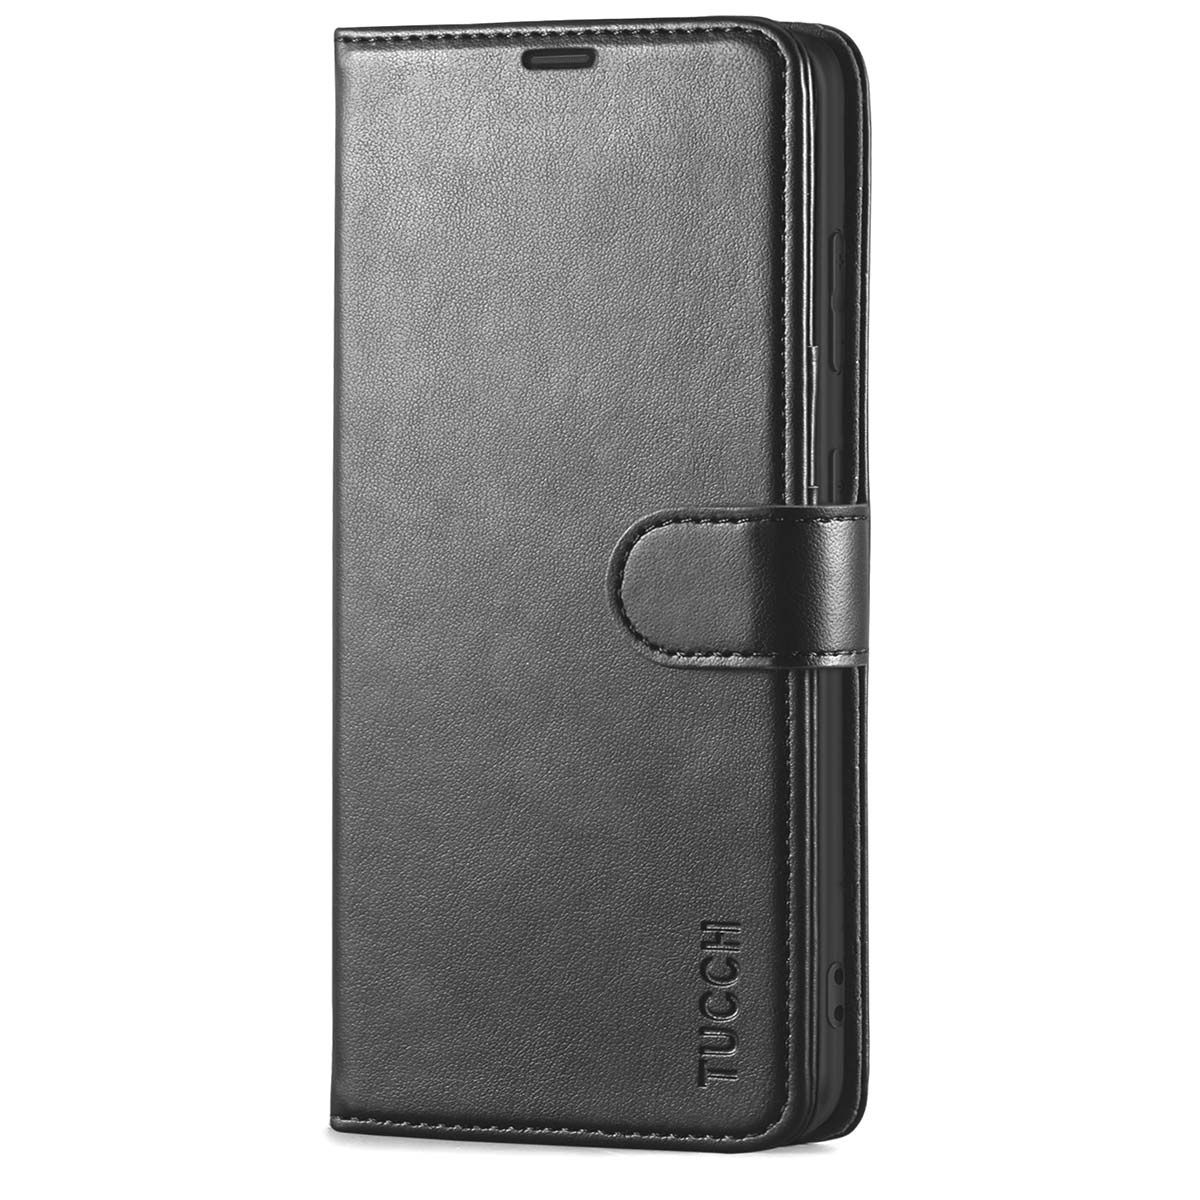 TUCCH SAMSUNG S21FE Wallet Case Shopping Online, SAMSUNG Galaxy S21 FE ...